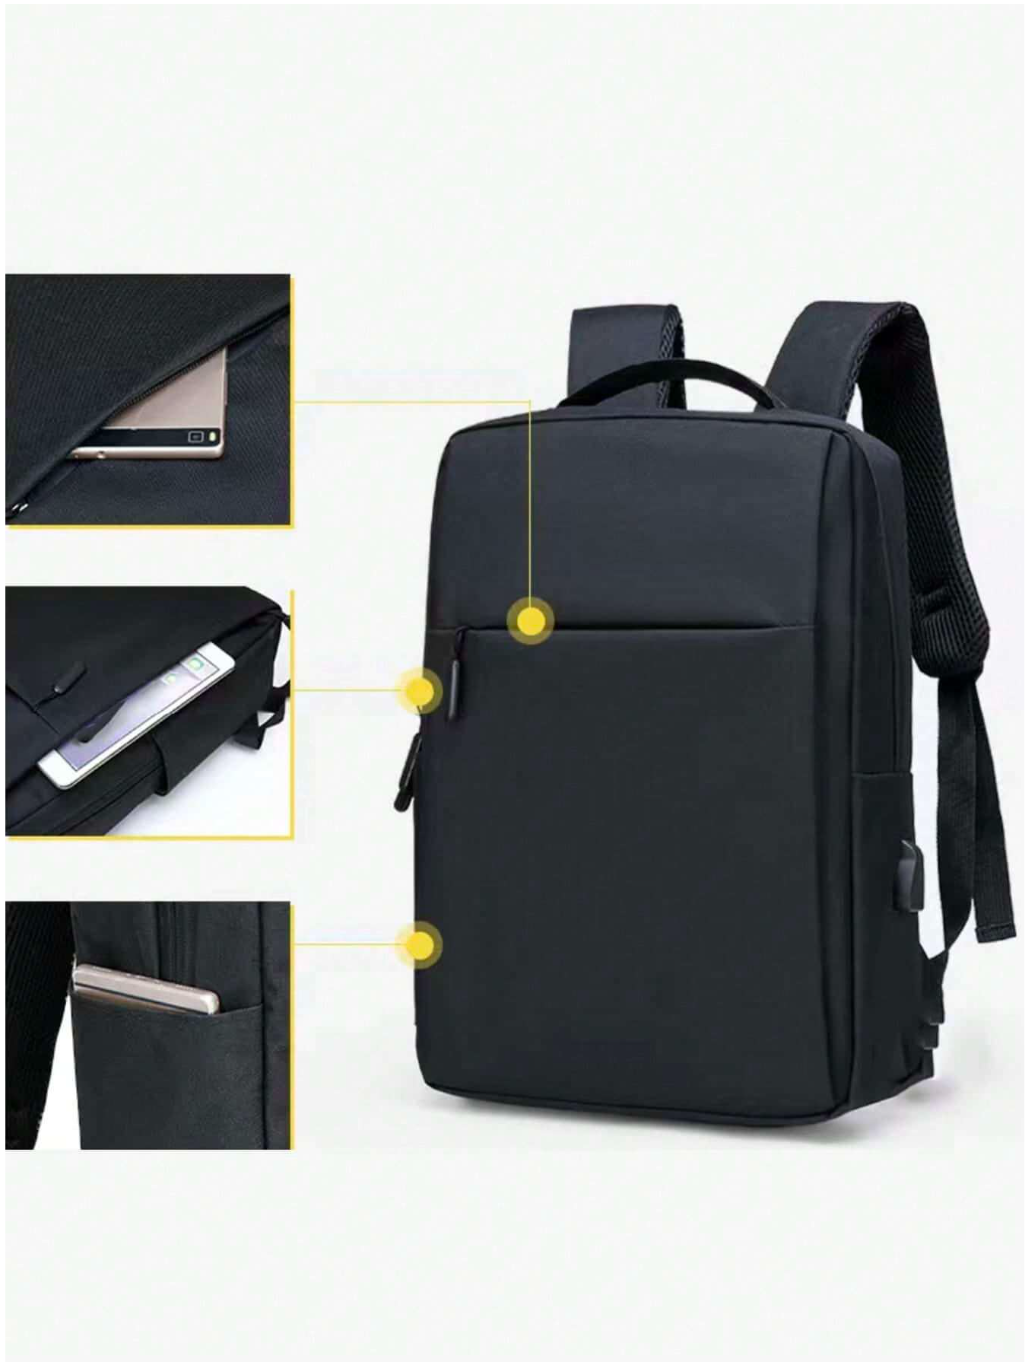 Ultimate Travel Companion: 16-inch Multifunctional Laptop Backpack – Stylish, Spacious, and Unisex!